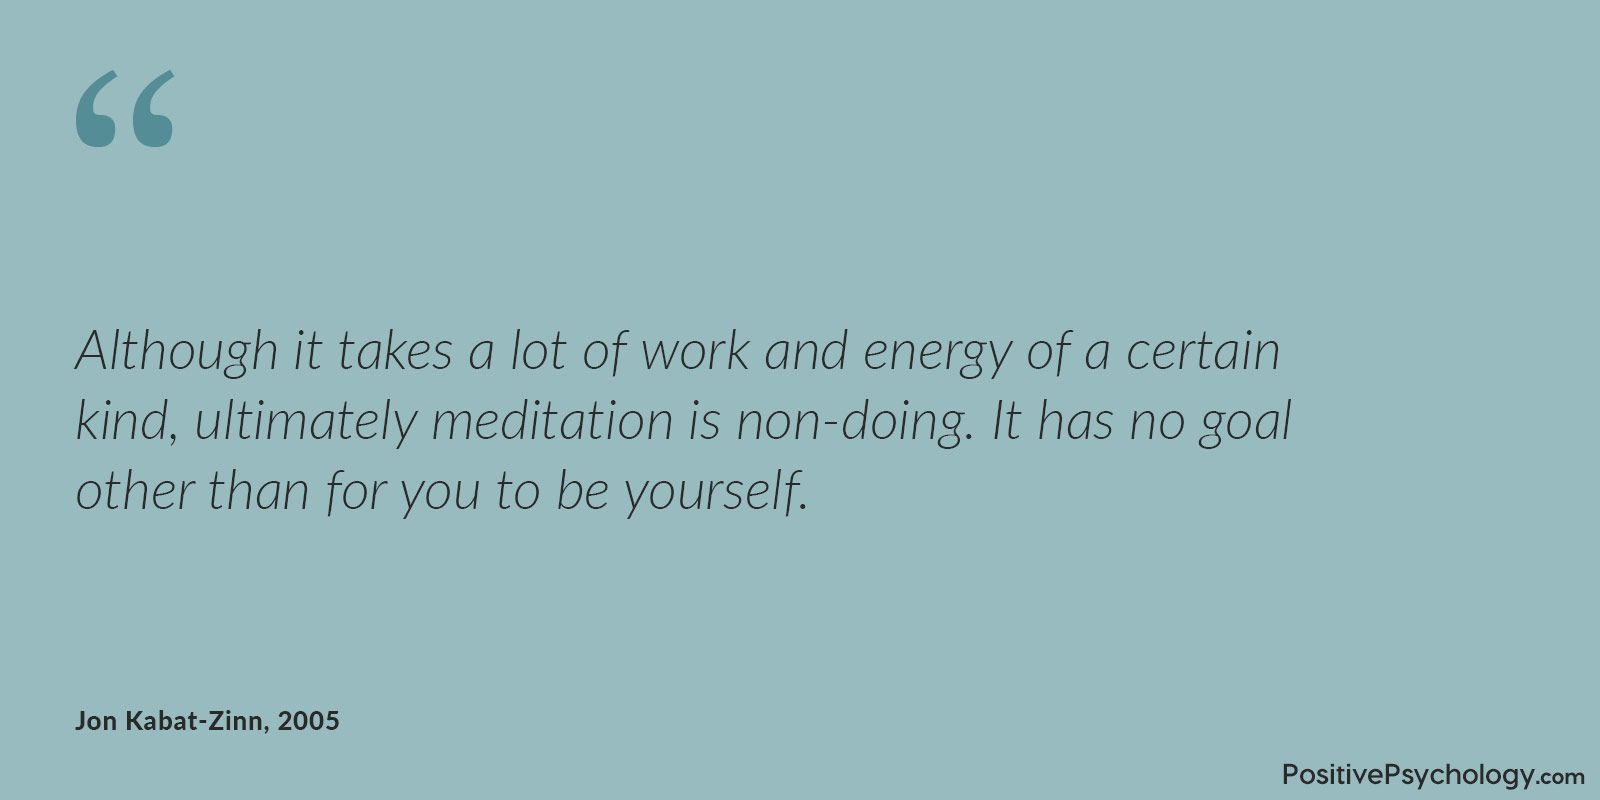 Meditation is non-doing